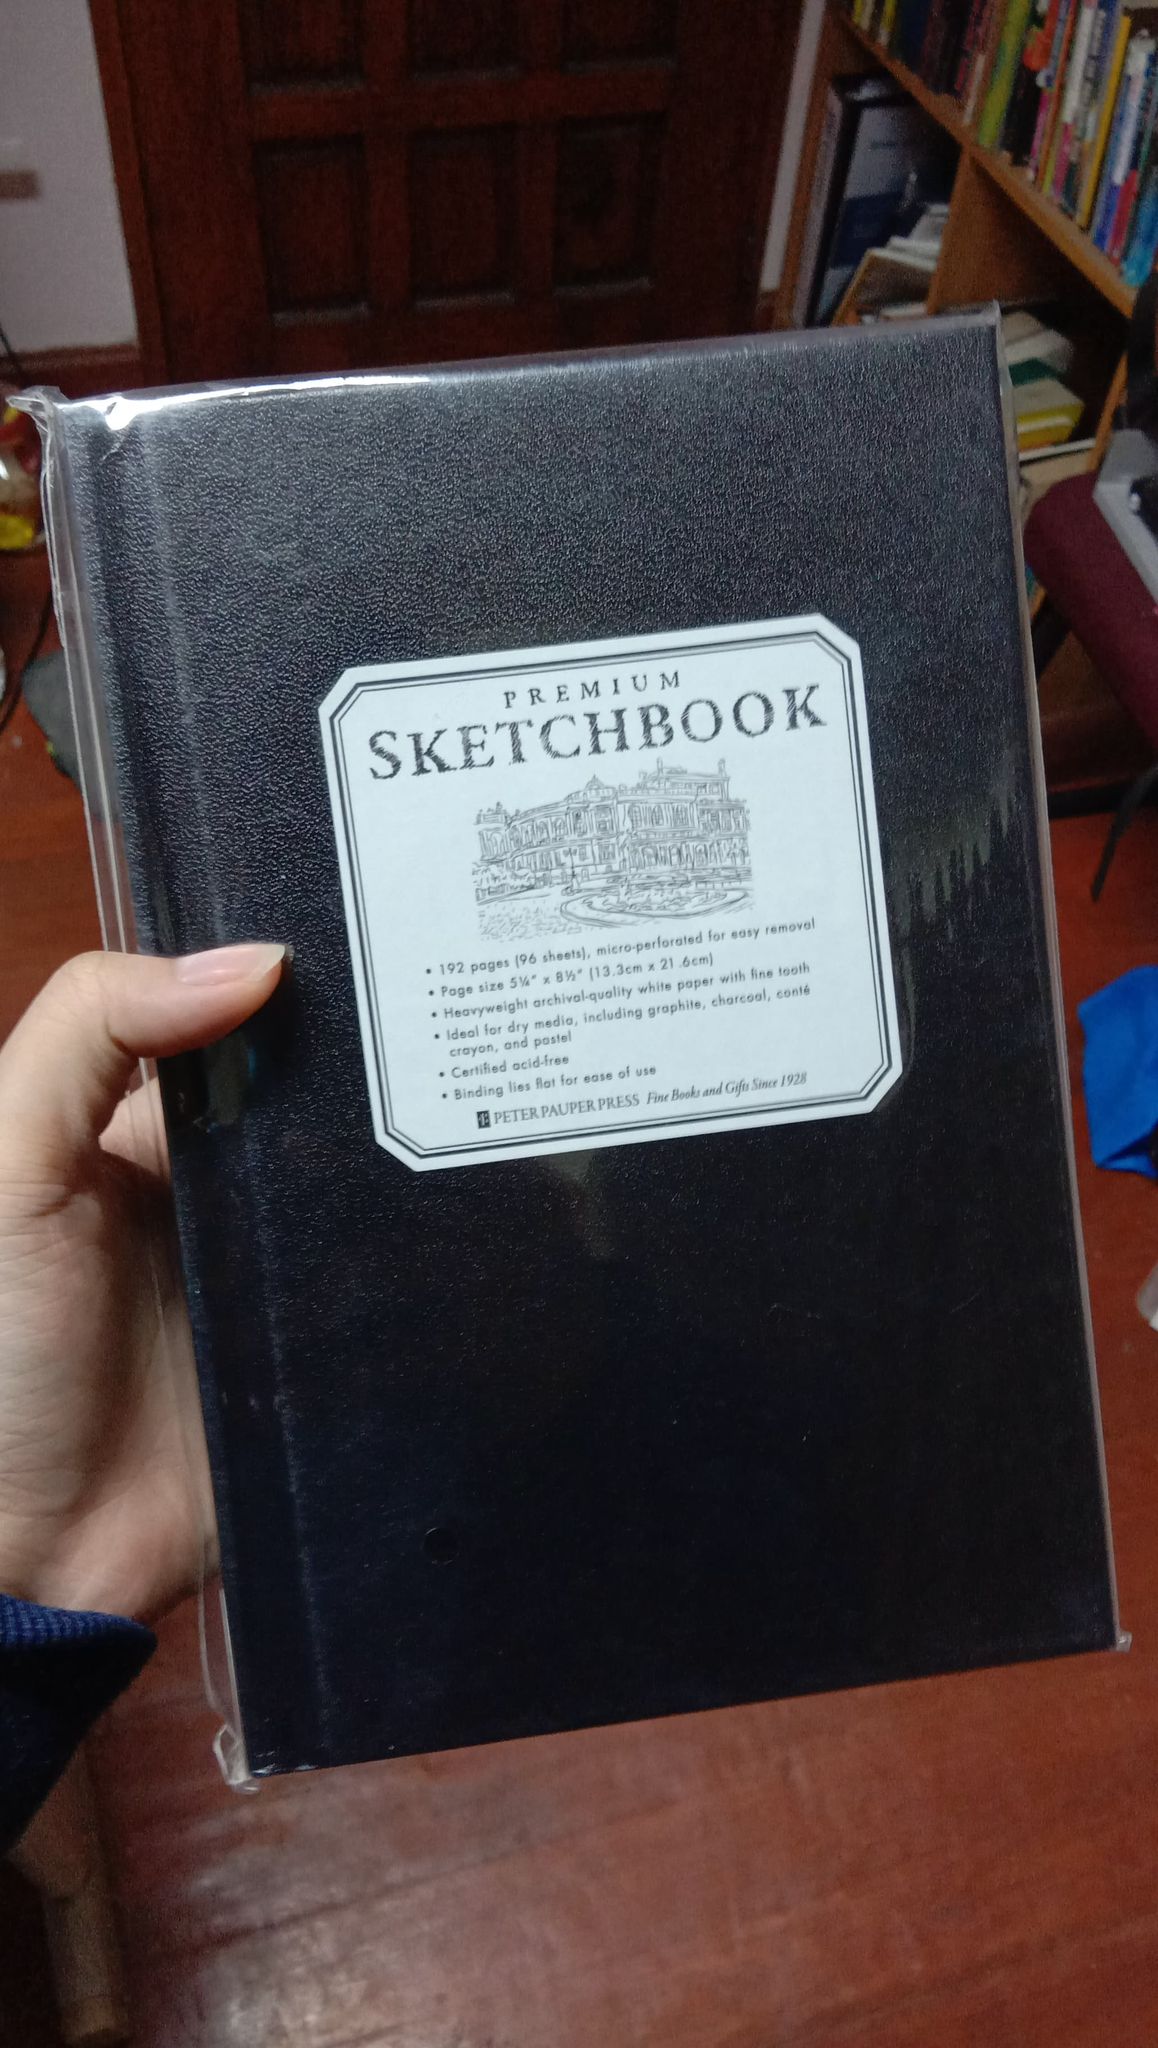 Premium Black Sketchbook Small 5 1/2 inch x 8 1/2 inch, Micro-Perforated Pages 